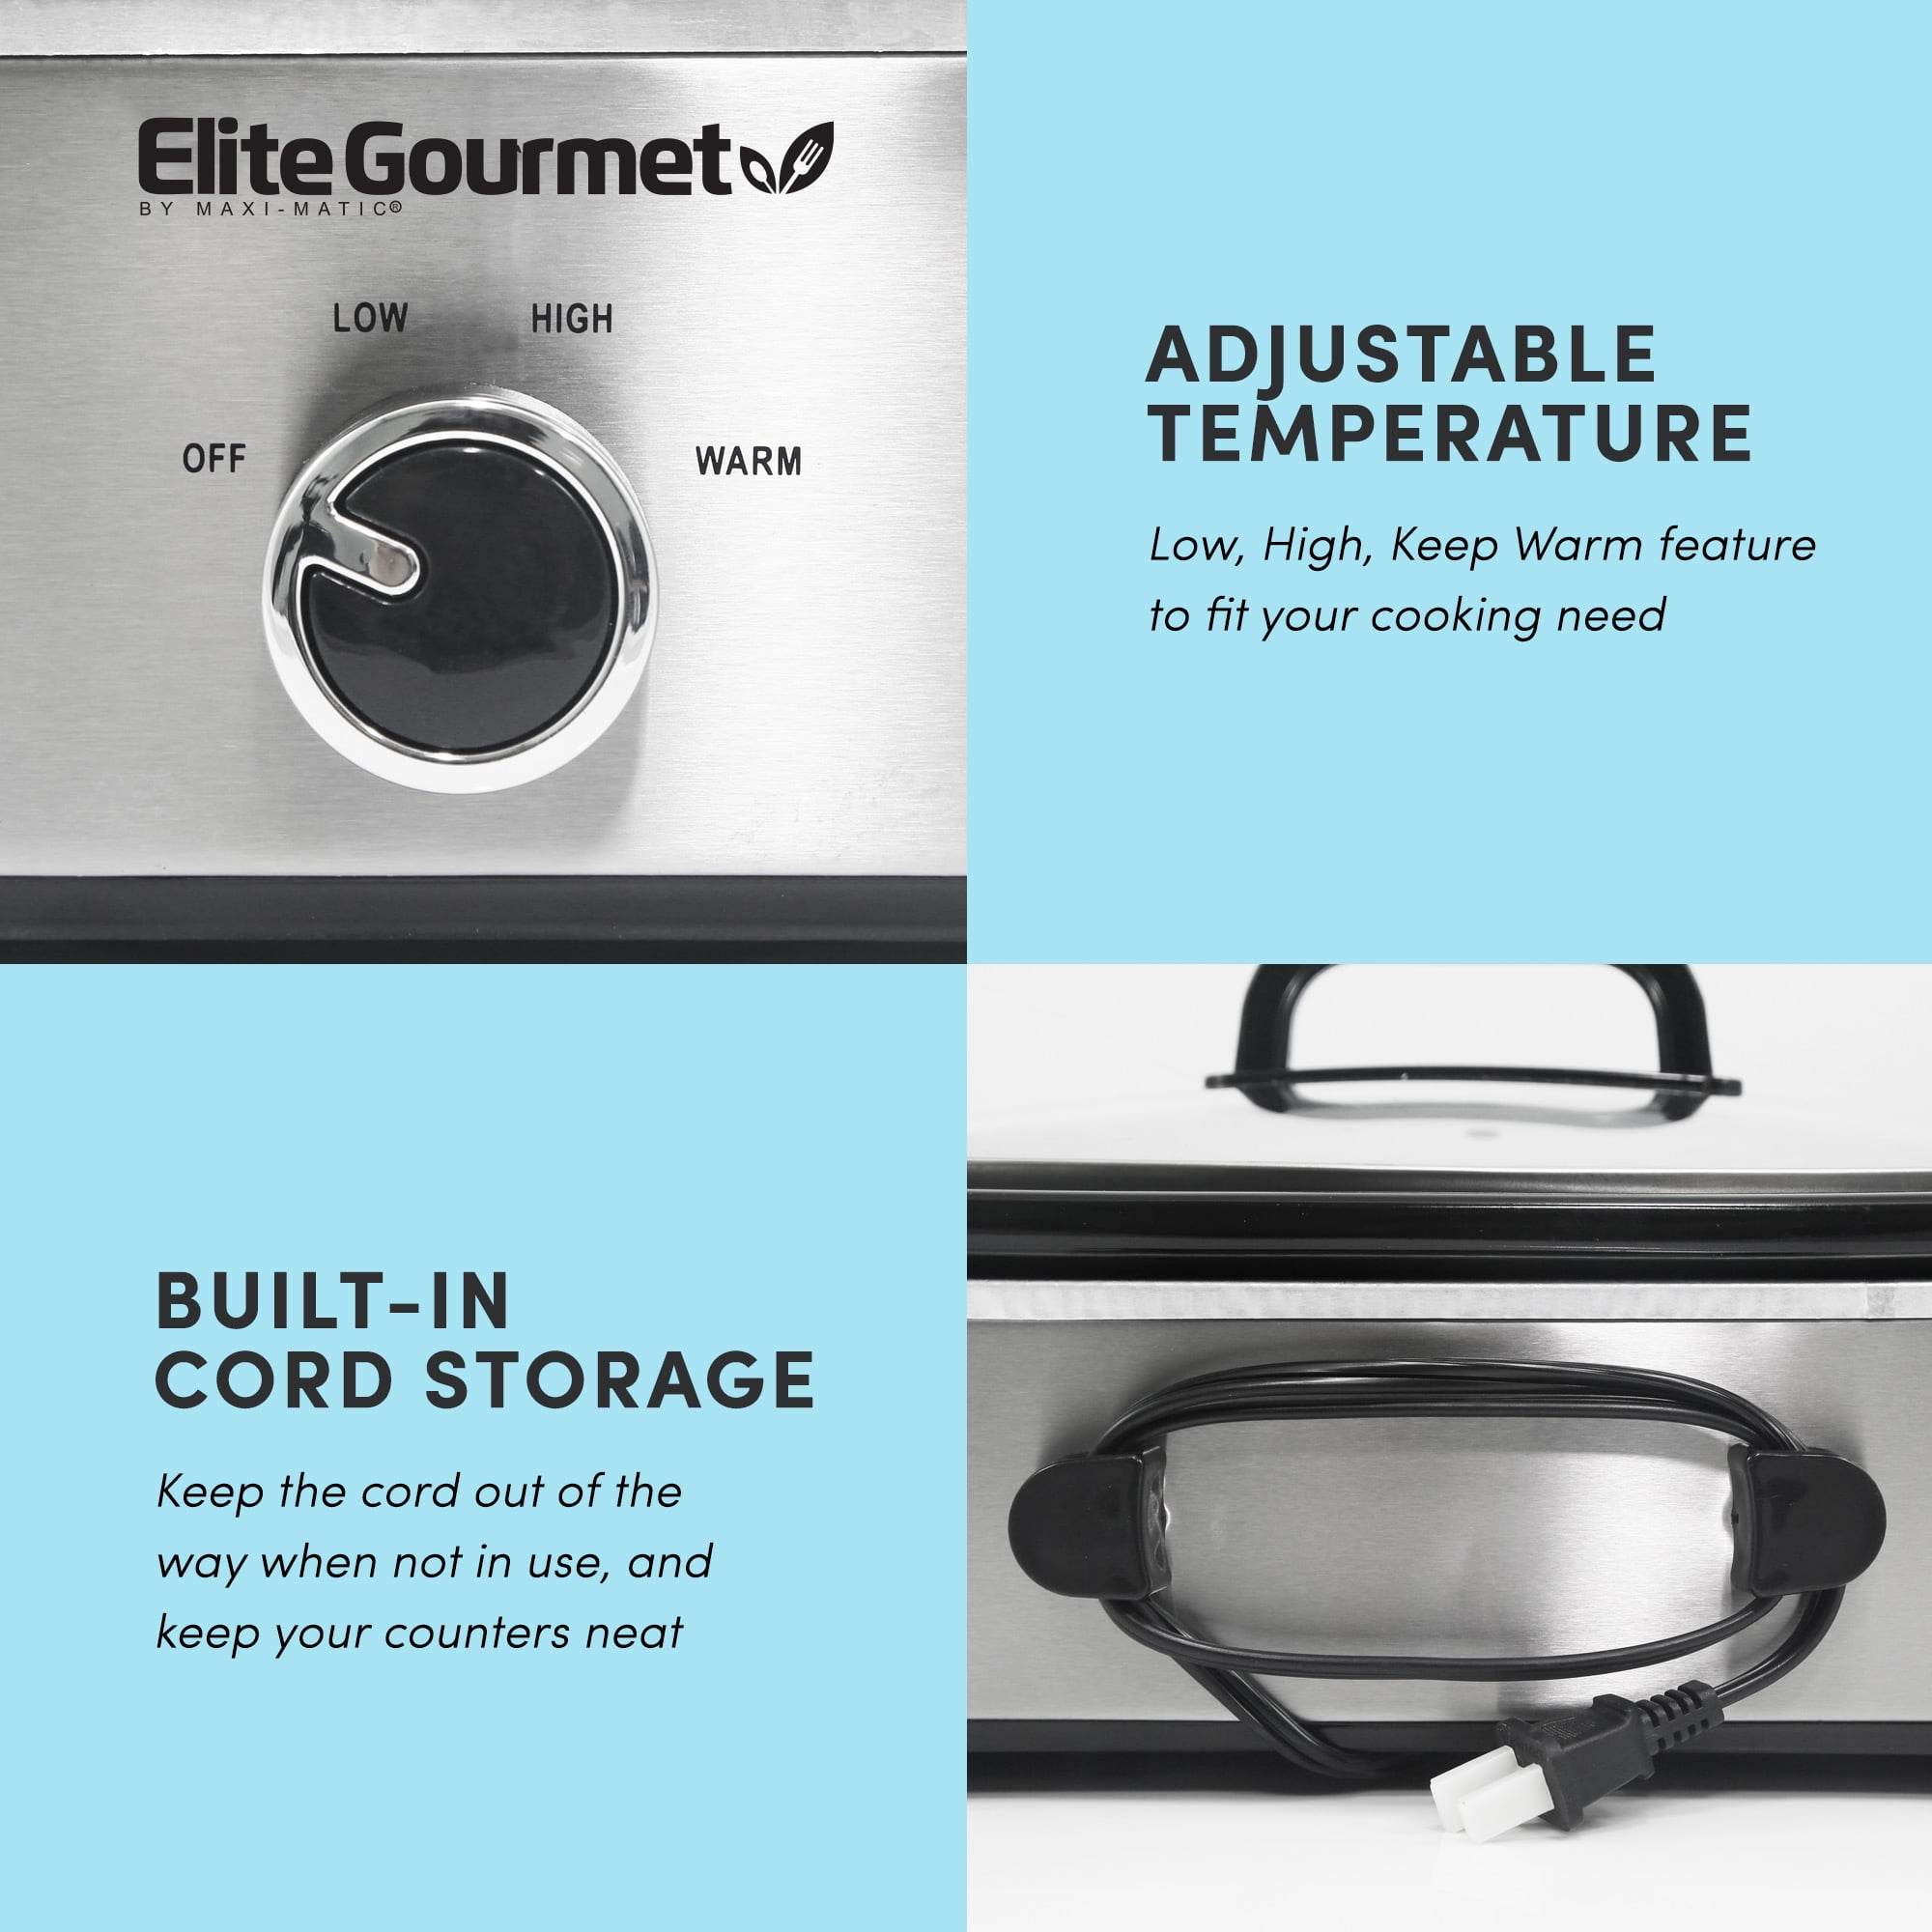 Elite Gourmet 3.5-qt. Slow Cooker with Locking Lid